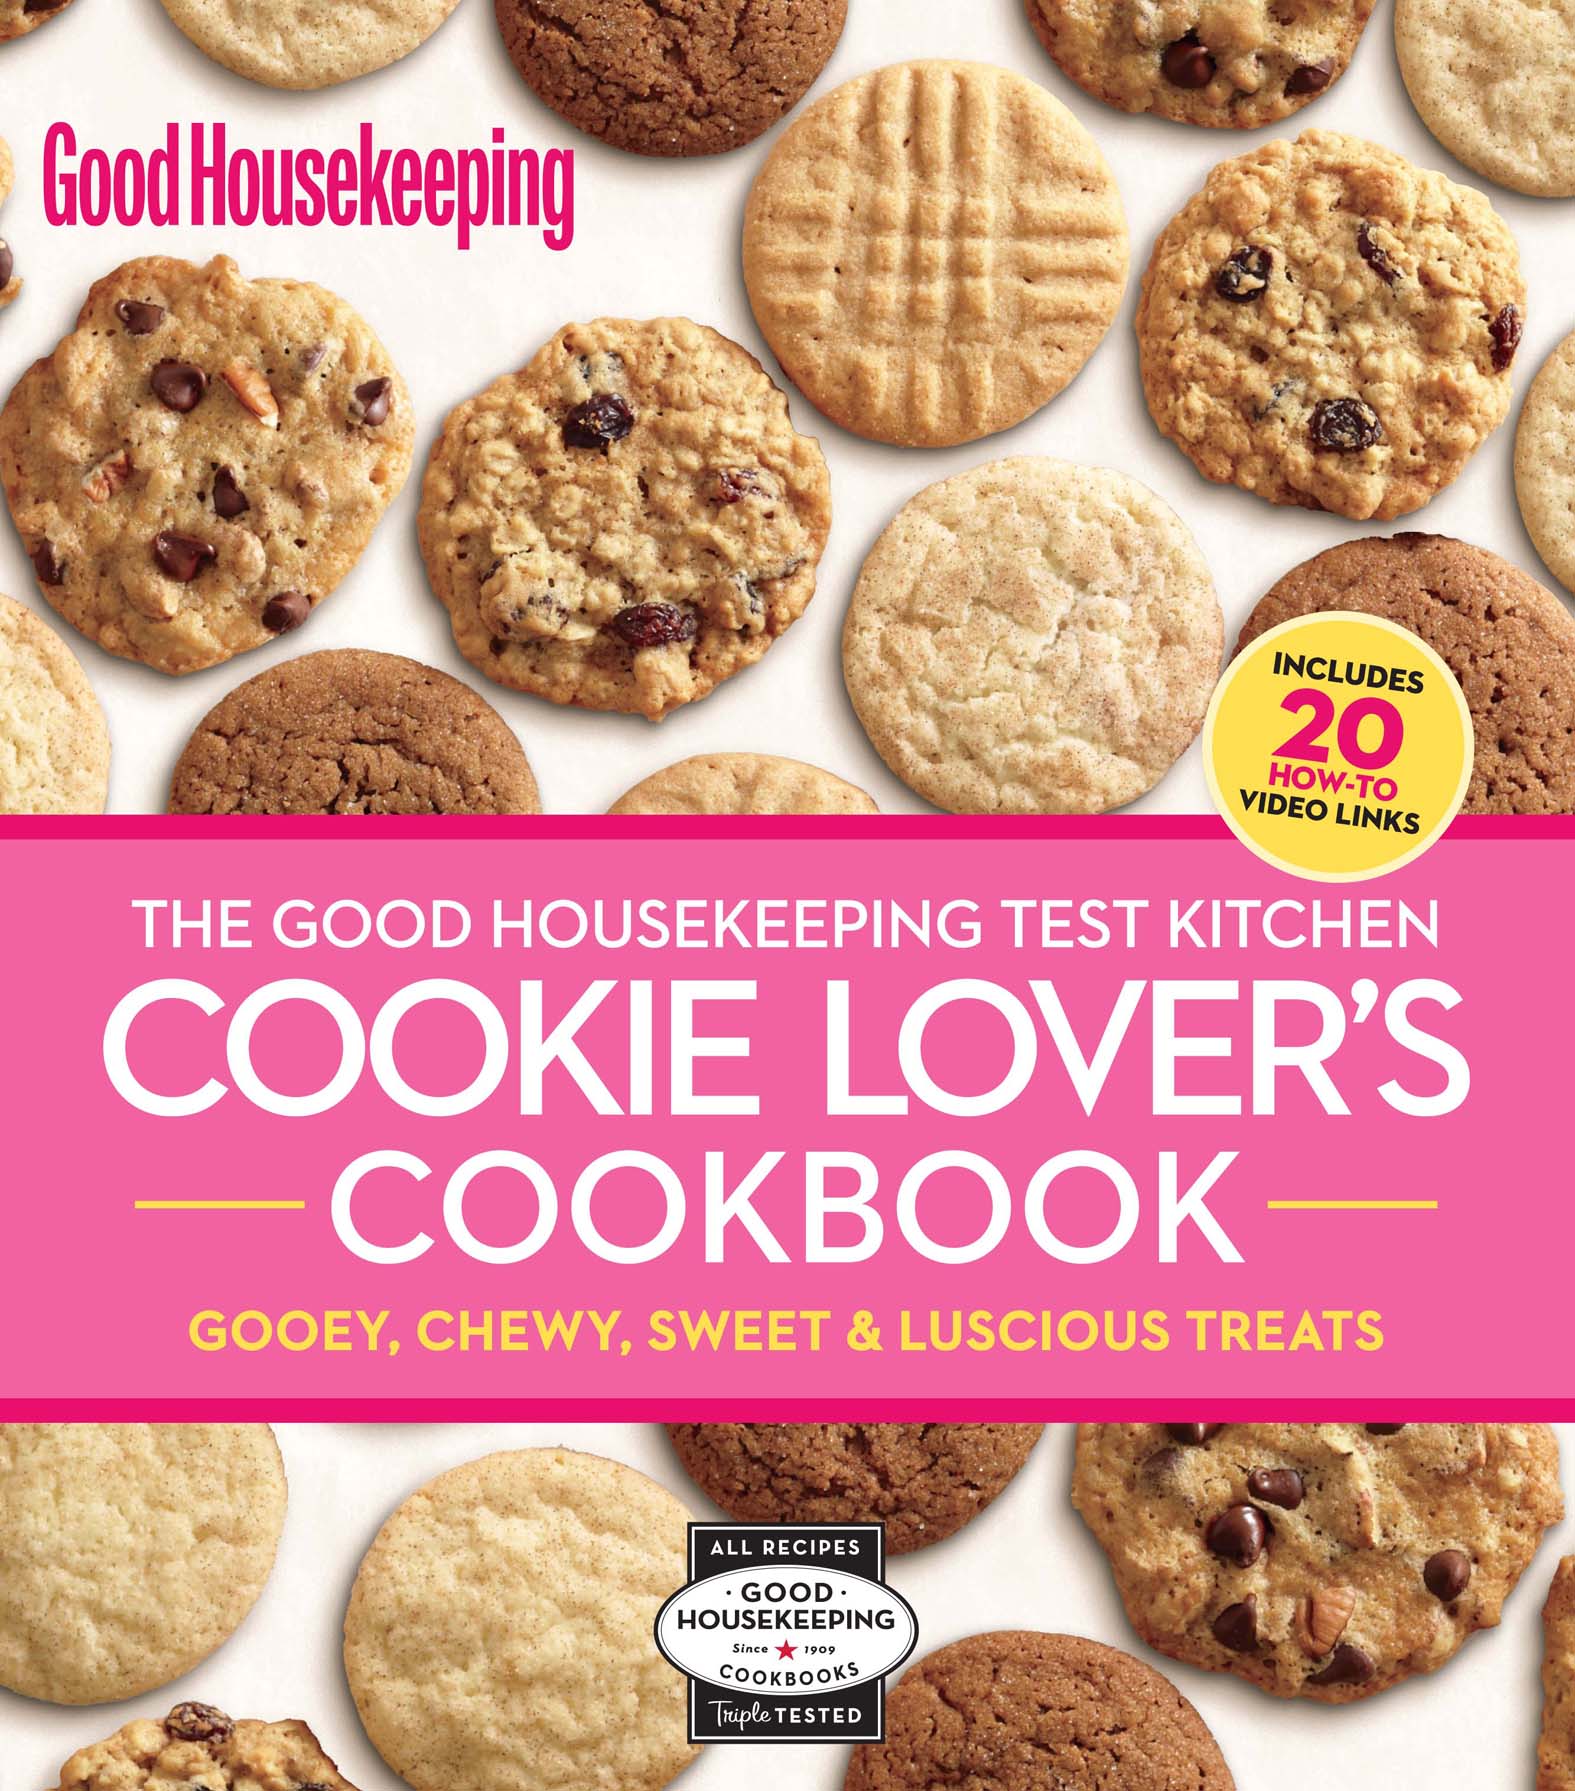 The Good Housekeeping Test Kitchen Cookie Lover's Cookbook - <5